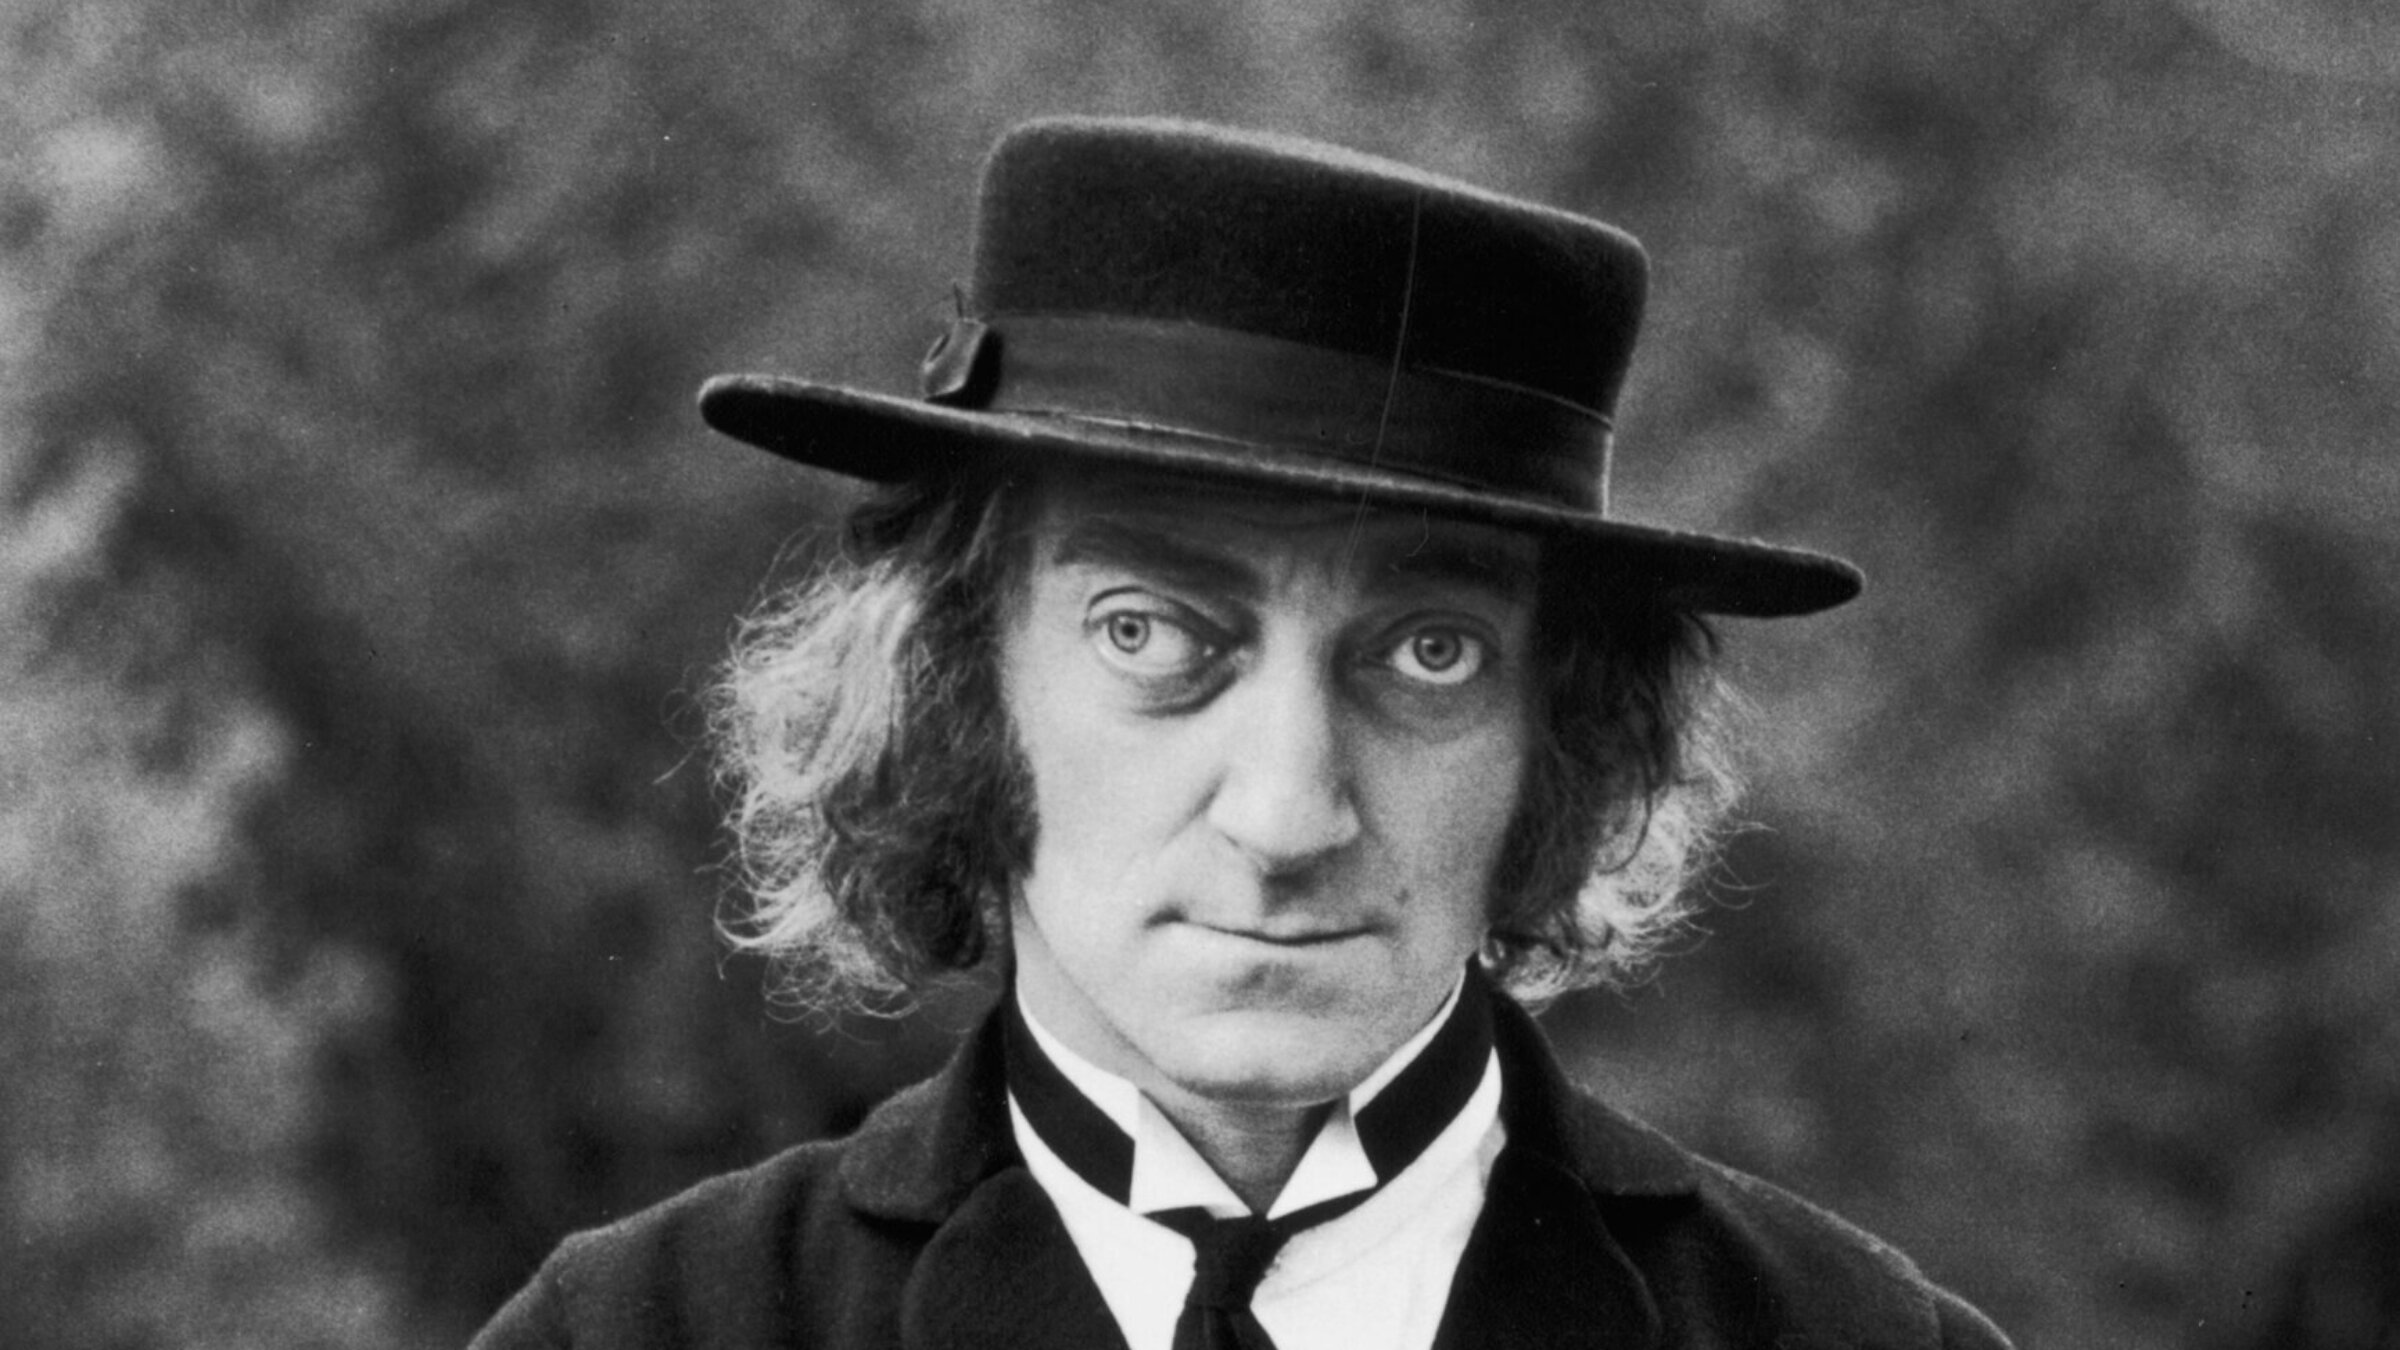 Marty Feldman in a promotional portrait for the television show, "The Marty Feldman Comedy Machine."